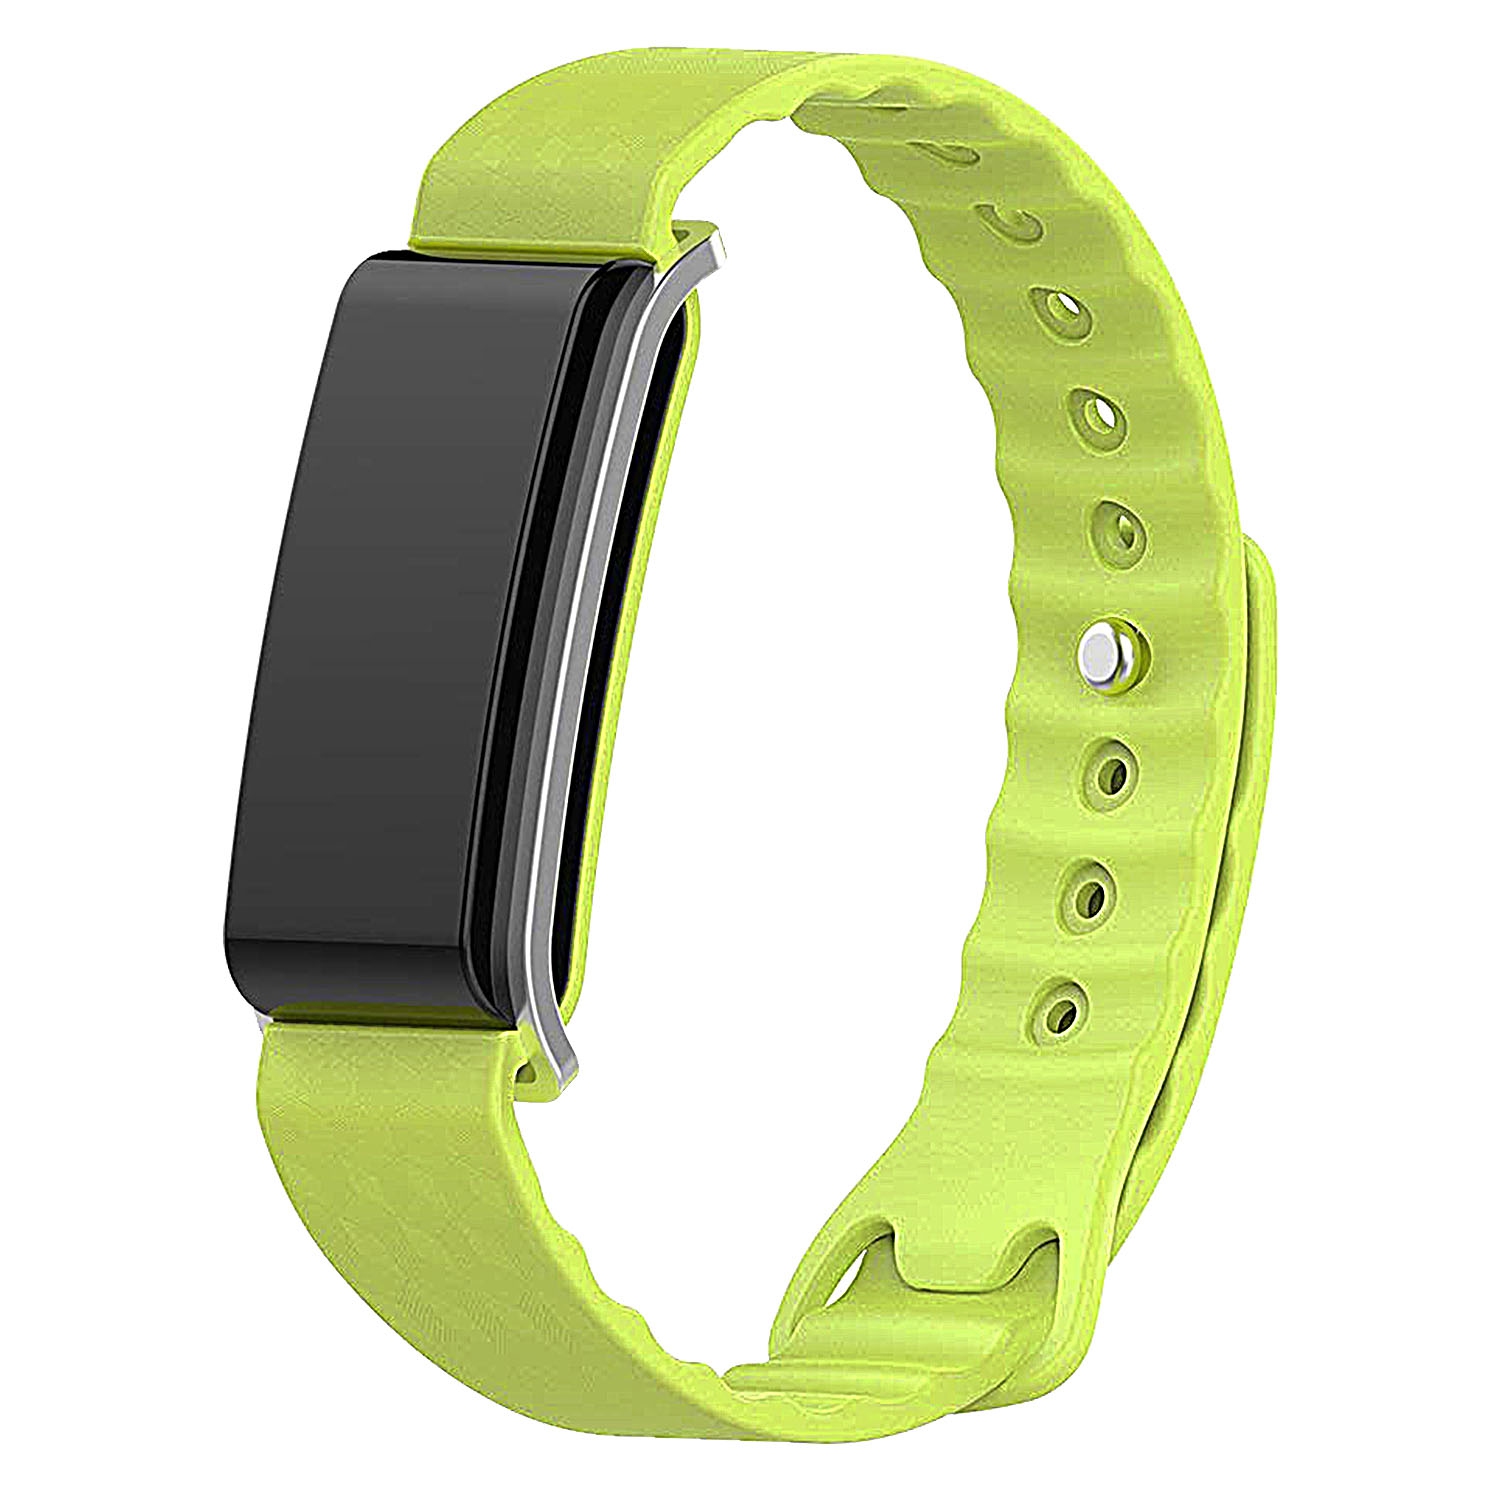 StrapsCo Classic Silicone Rubber Replacement Watch Strap for Huawei Honor/Color Band A2 - Green